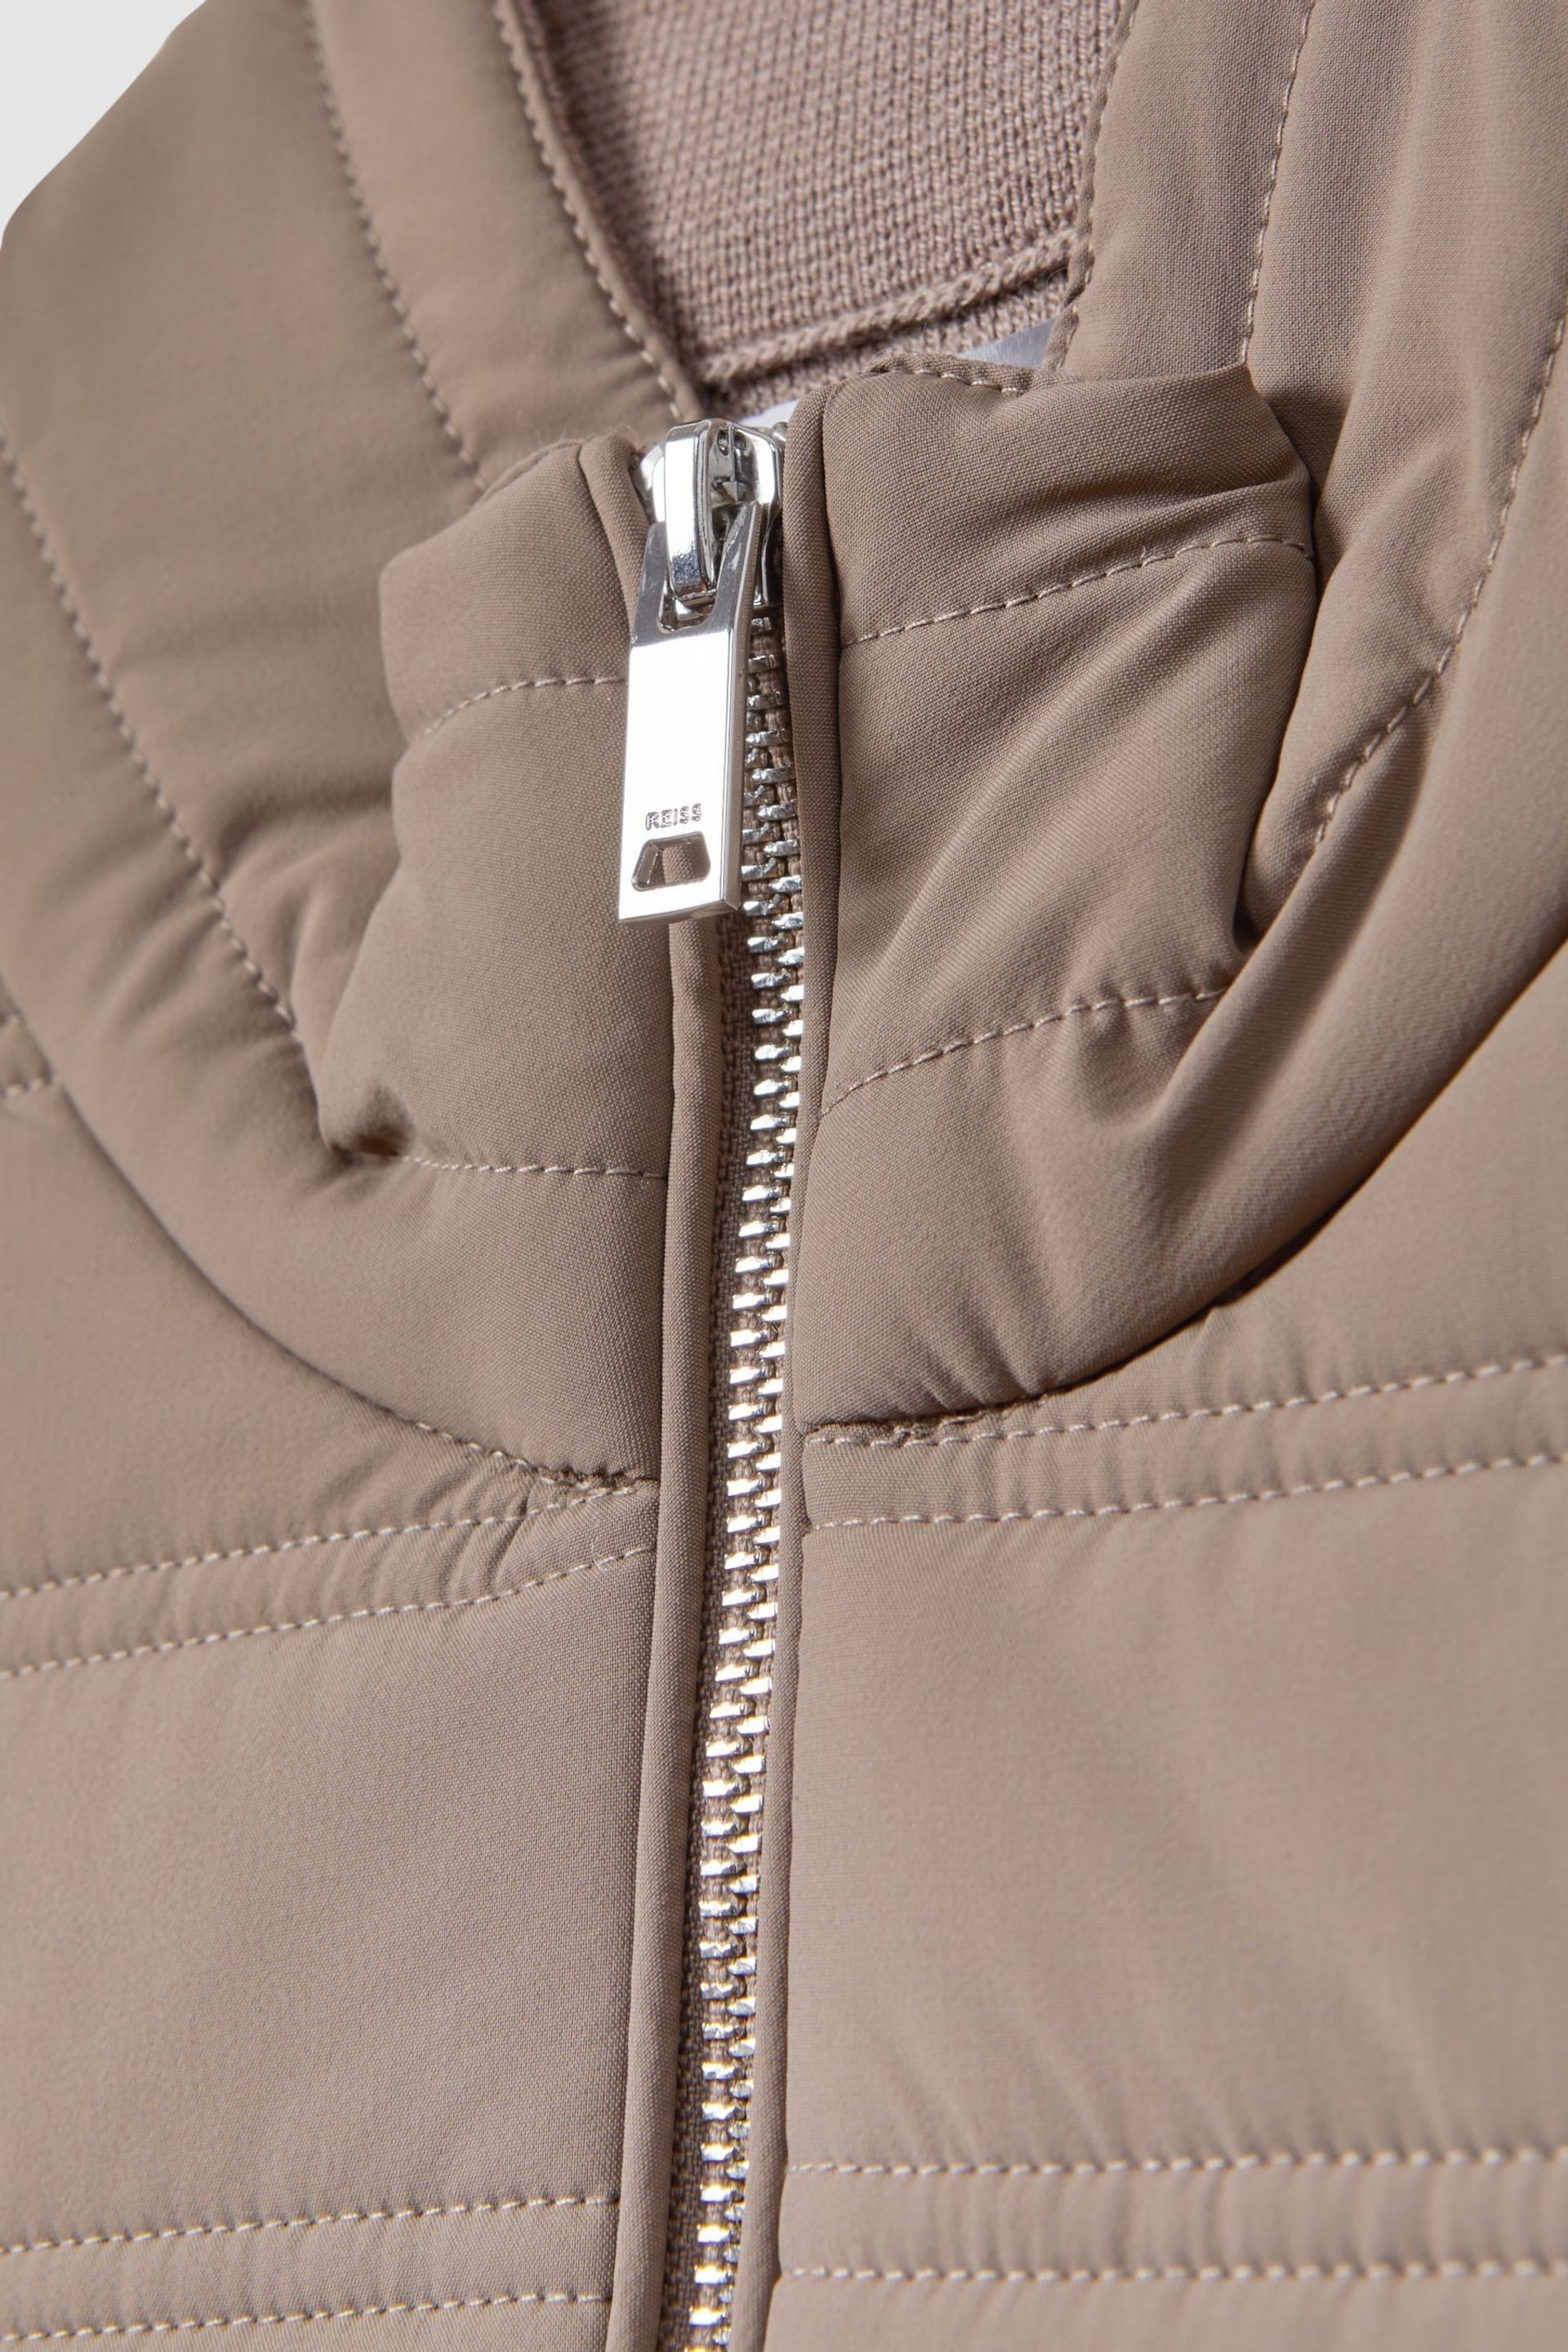 Reiss Mink Cranford Hybrid Quilt and Knit Zip-Through Gilet - Image 6 of 6